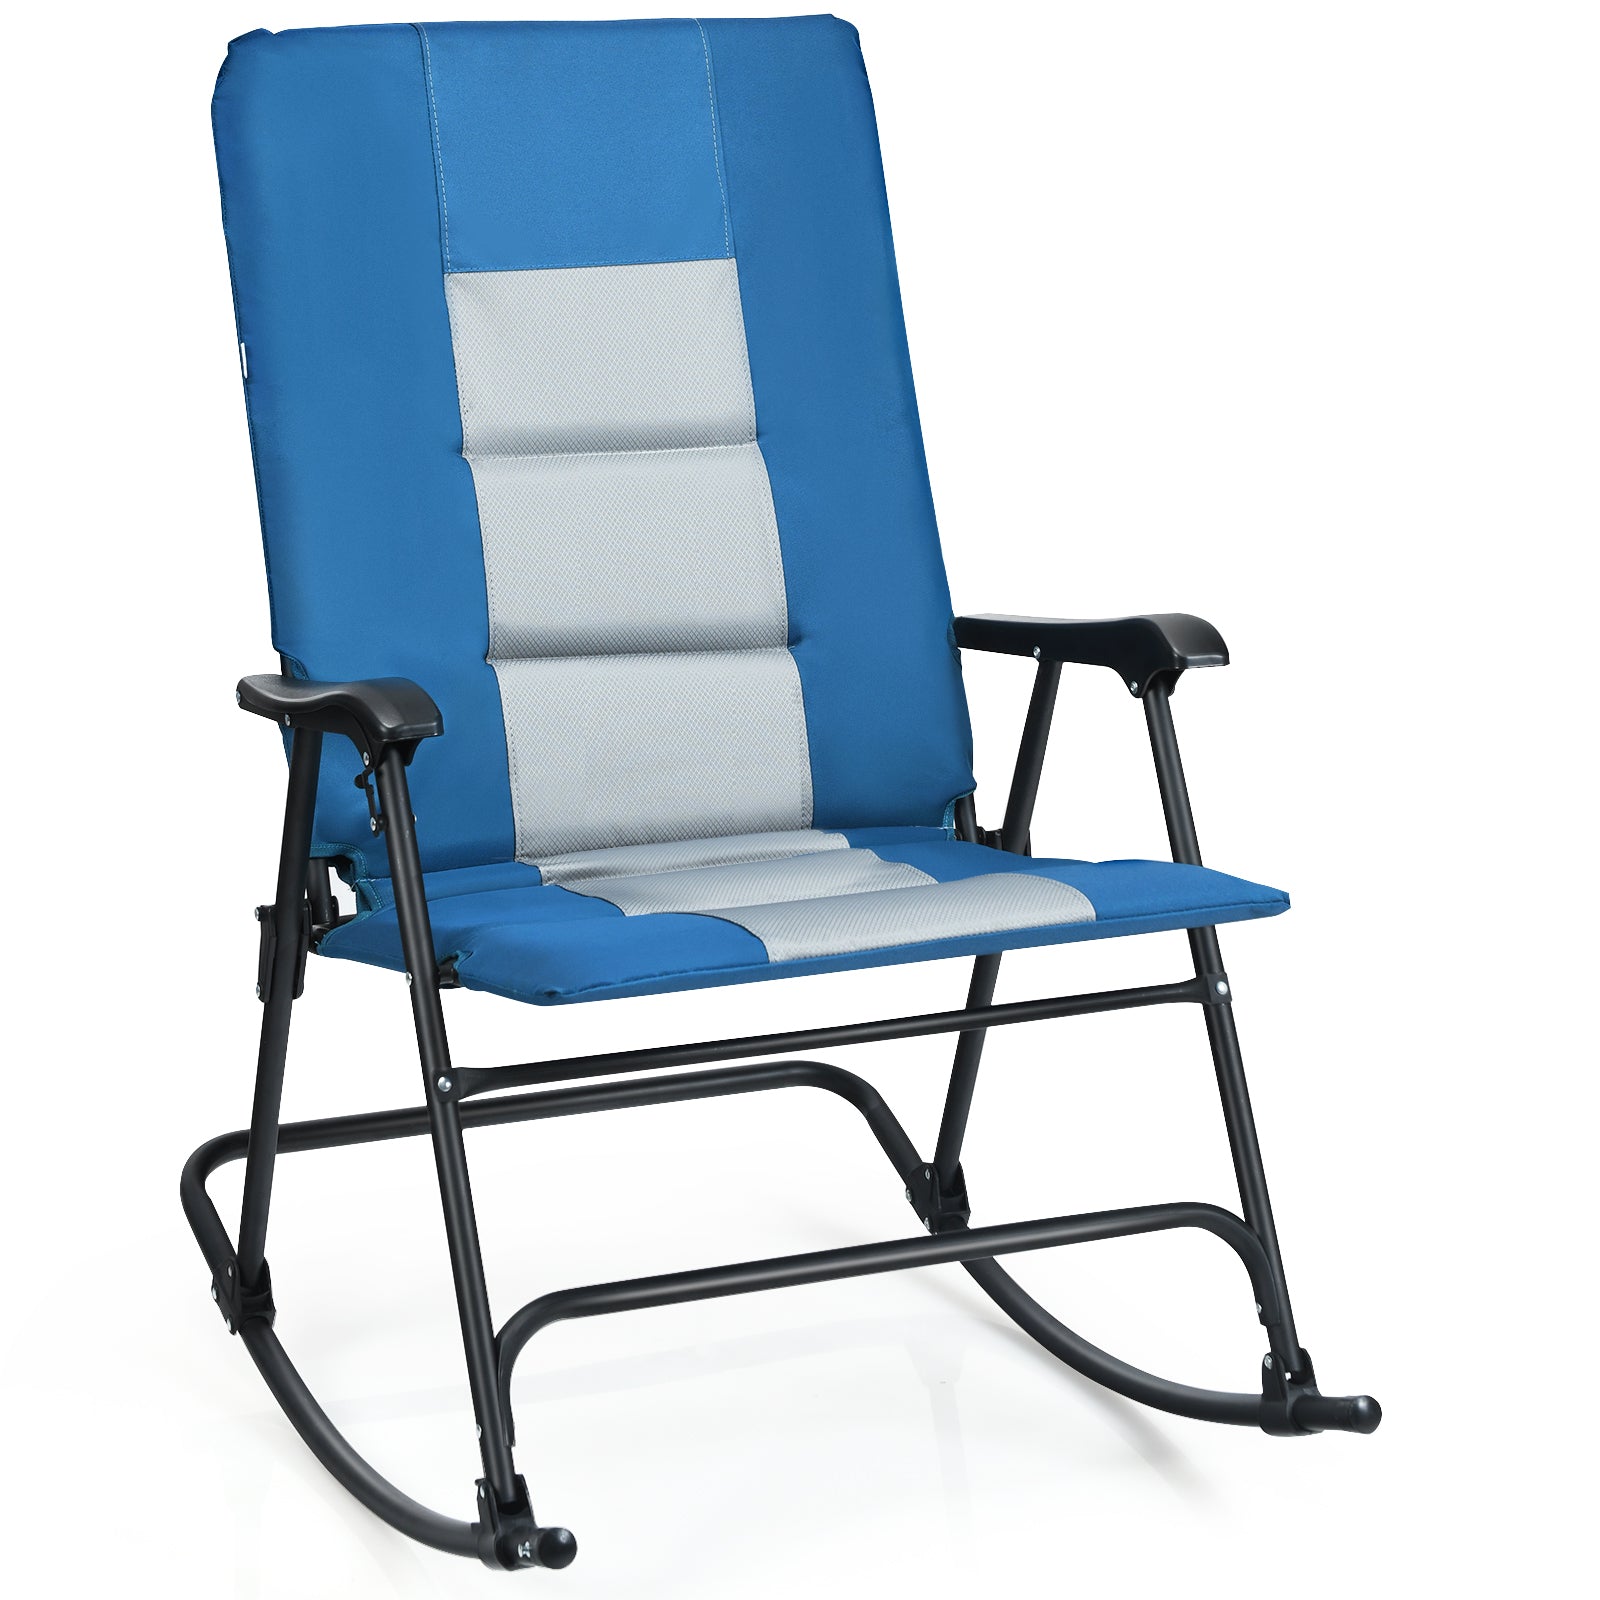 Foldable Padded Rocking Chair with High Back and Armrest for Patio Blue